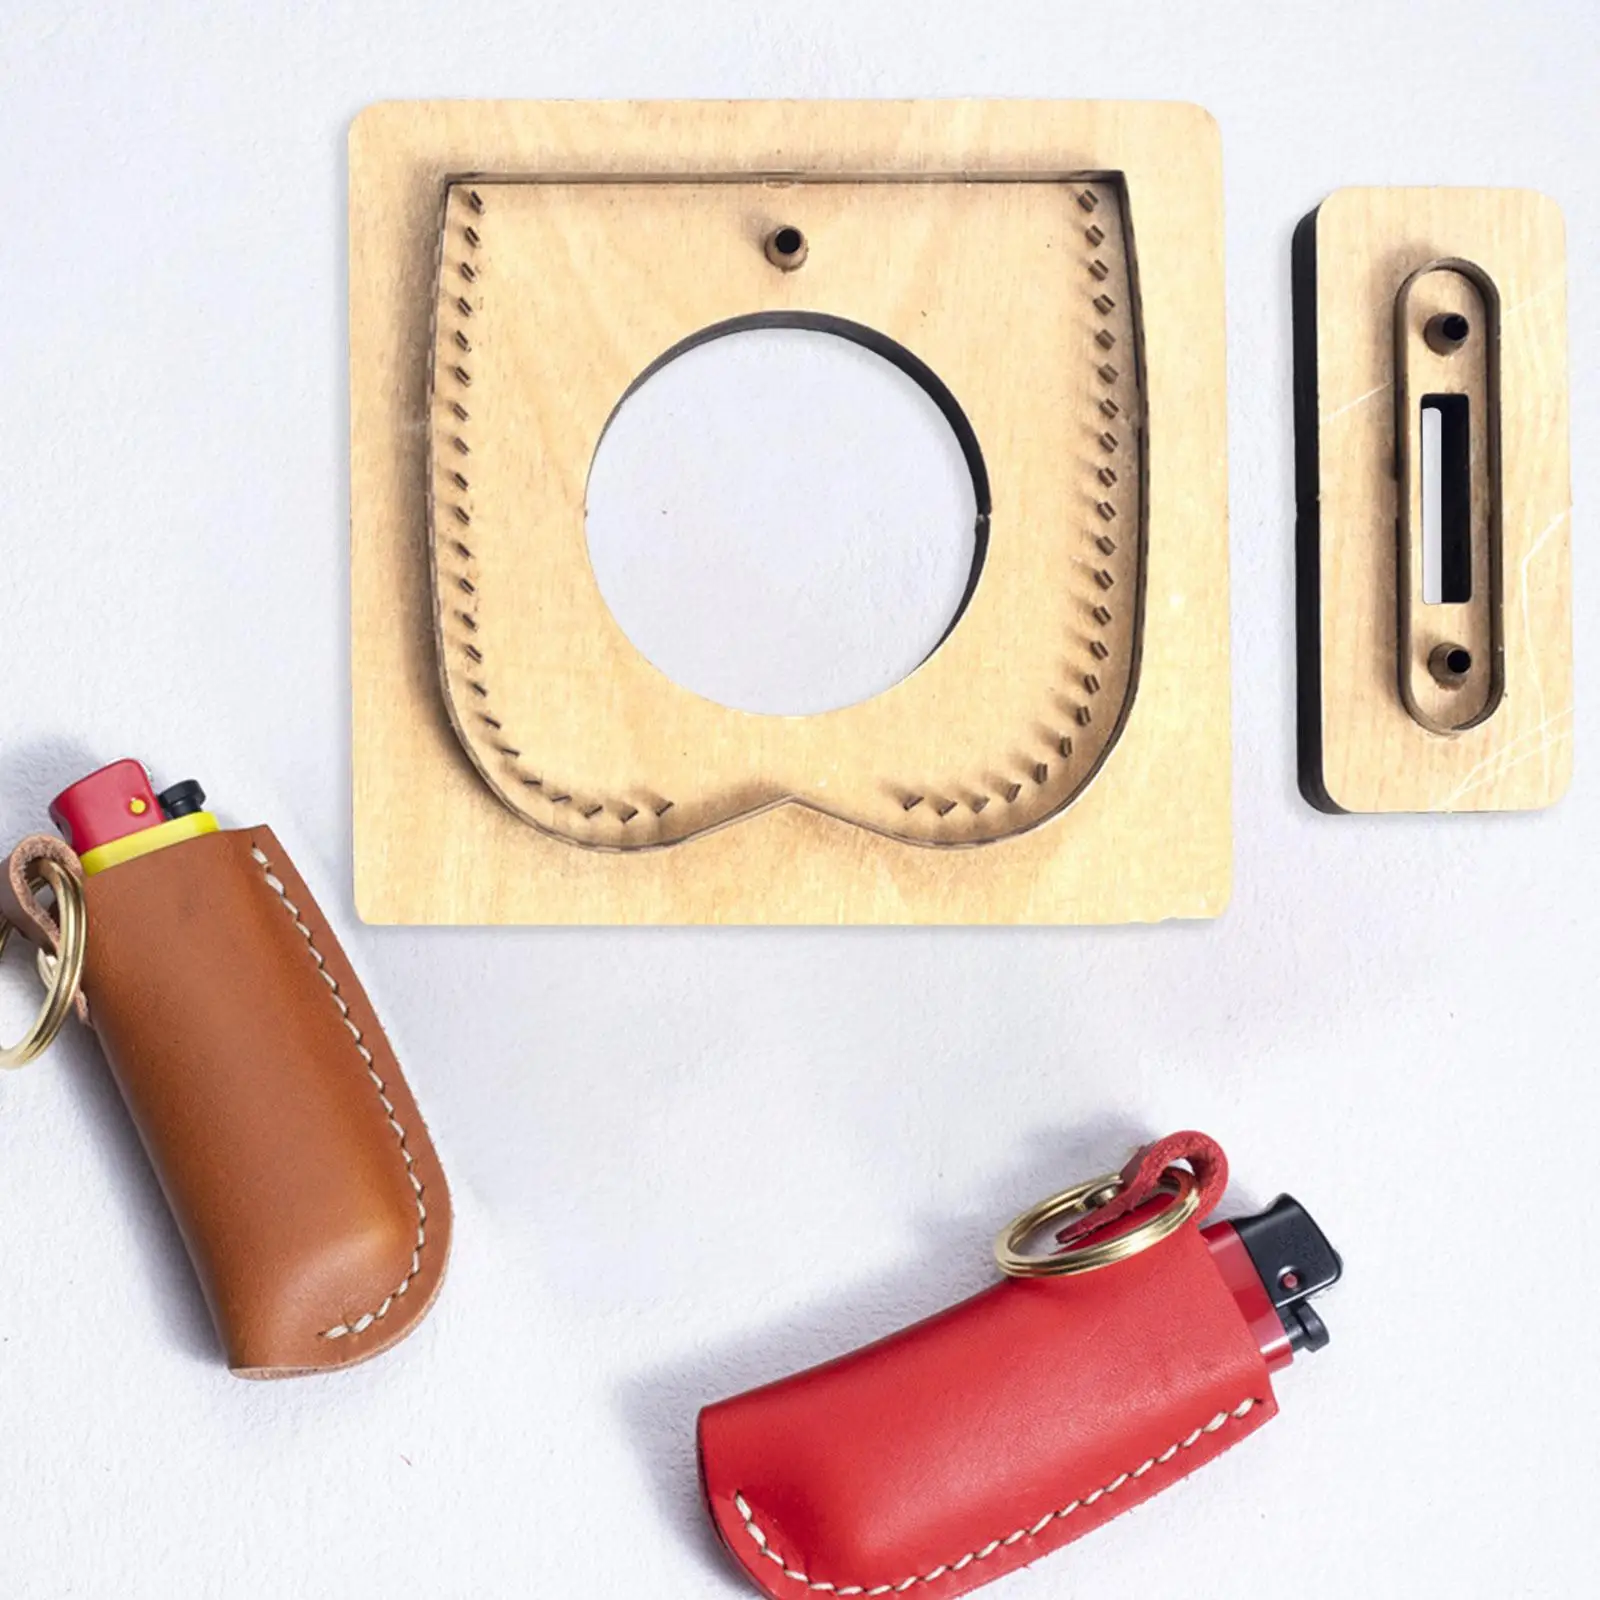 DIY Lighter Bag No Sewing Leathercraft Tool Handmade Stitch Hole Easy to Use Durable Leather Die Cutter Template Cut Mould